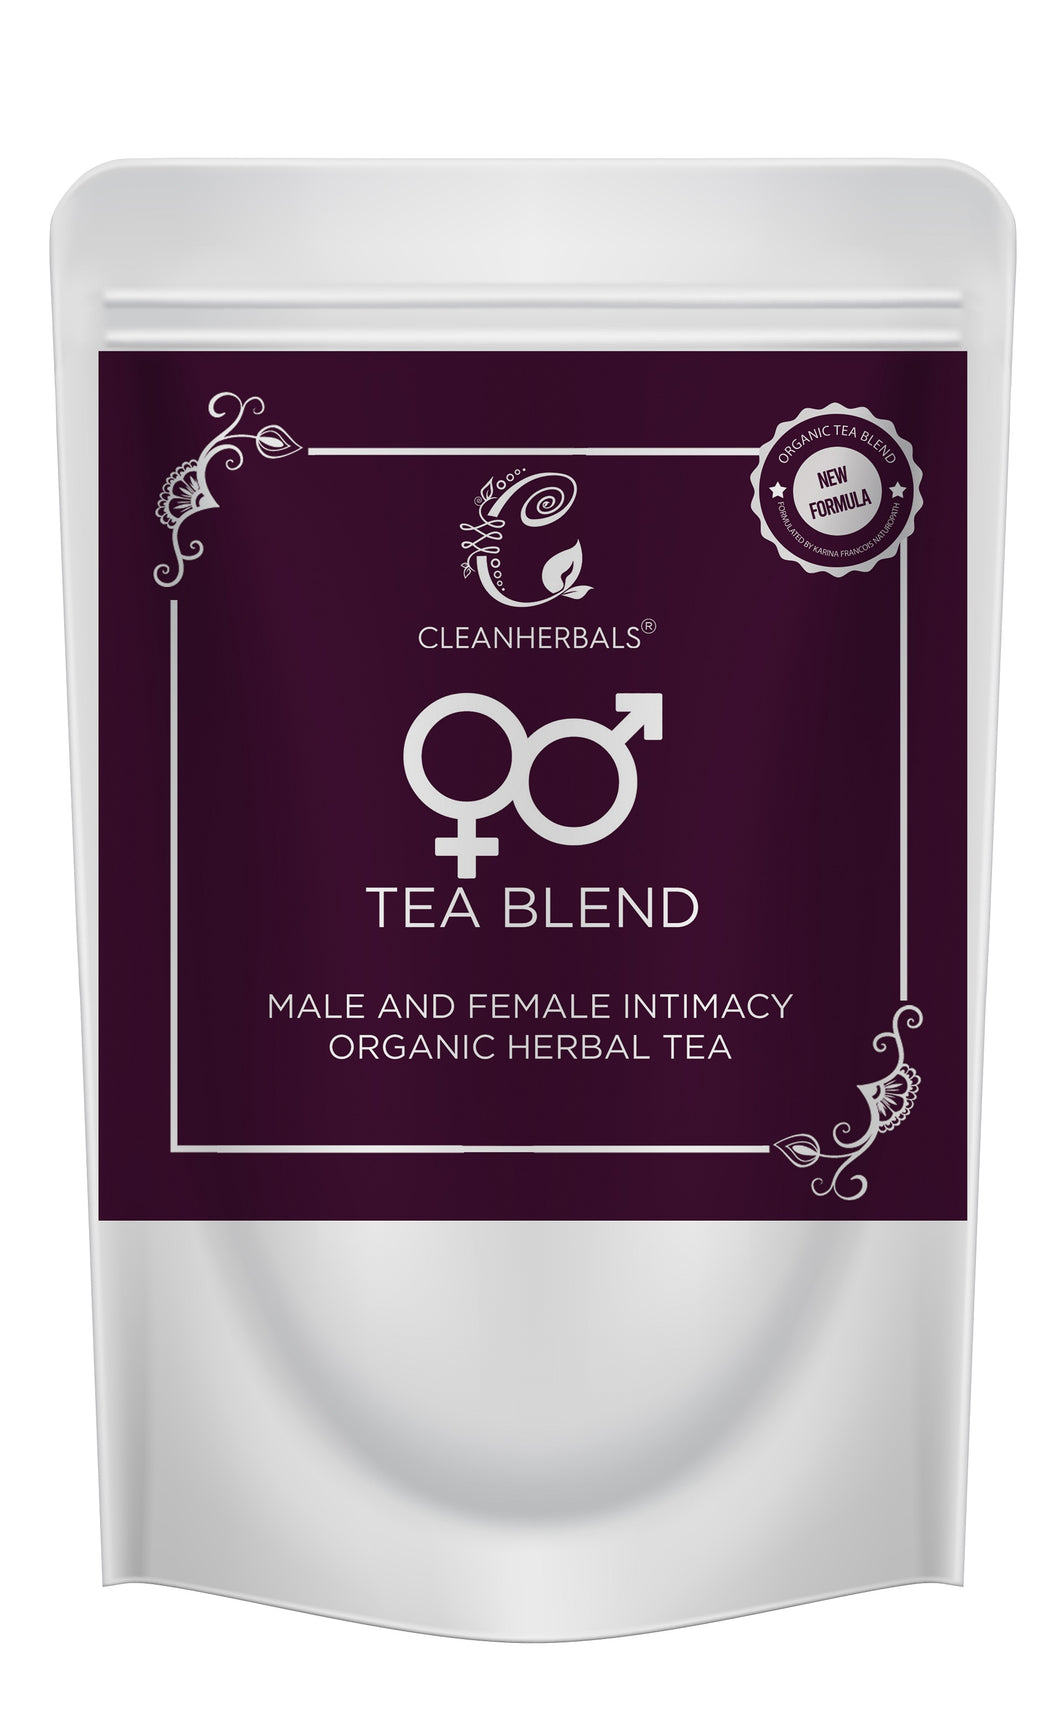 28 gm ♀♂ Tea Blend Male and Female Intimacy Organic Herbal Tea & Thermos Pack